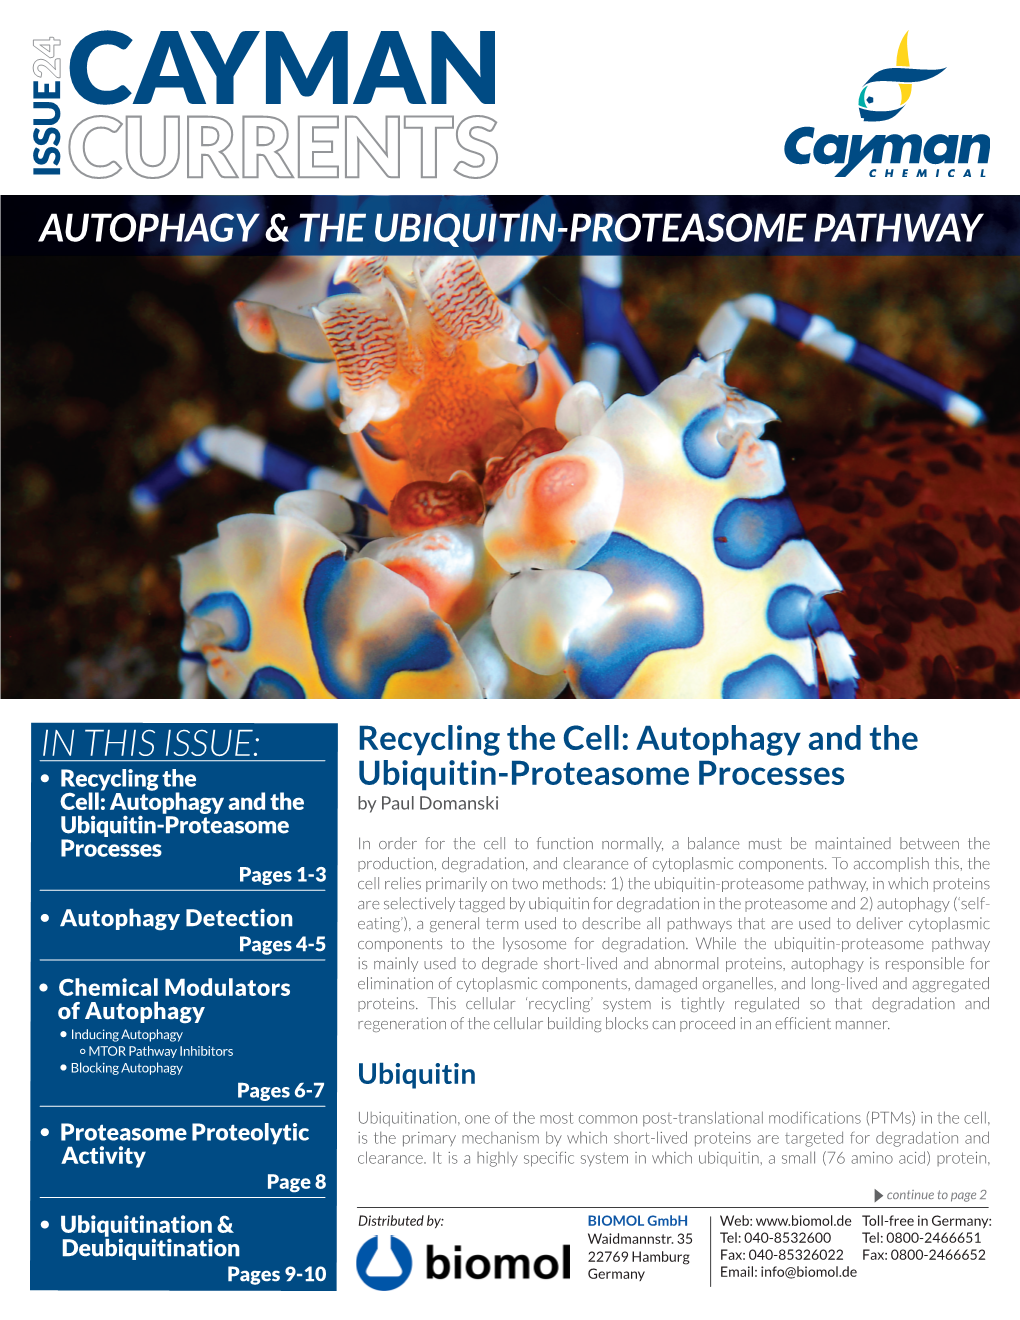 Cayman Issue Autophagy & the Ubiquitin-Proteasome Pathway